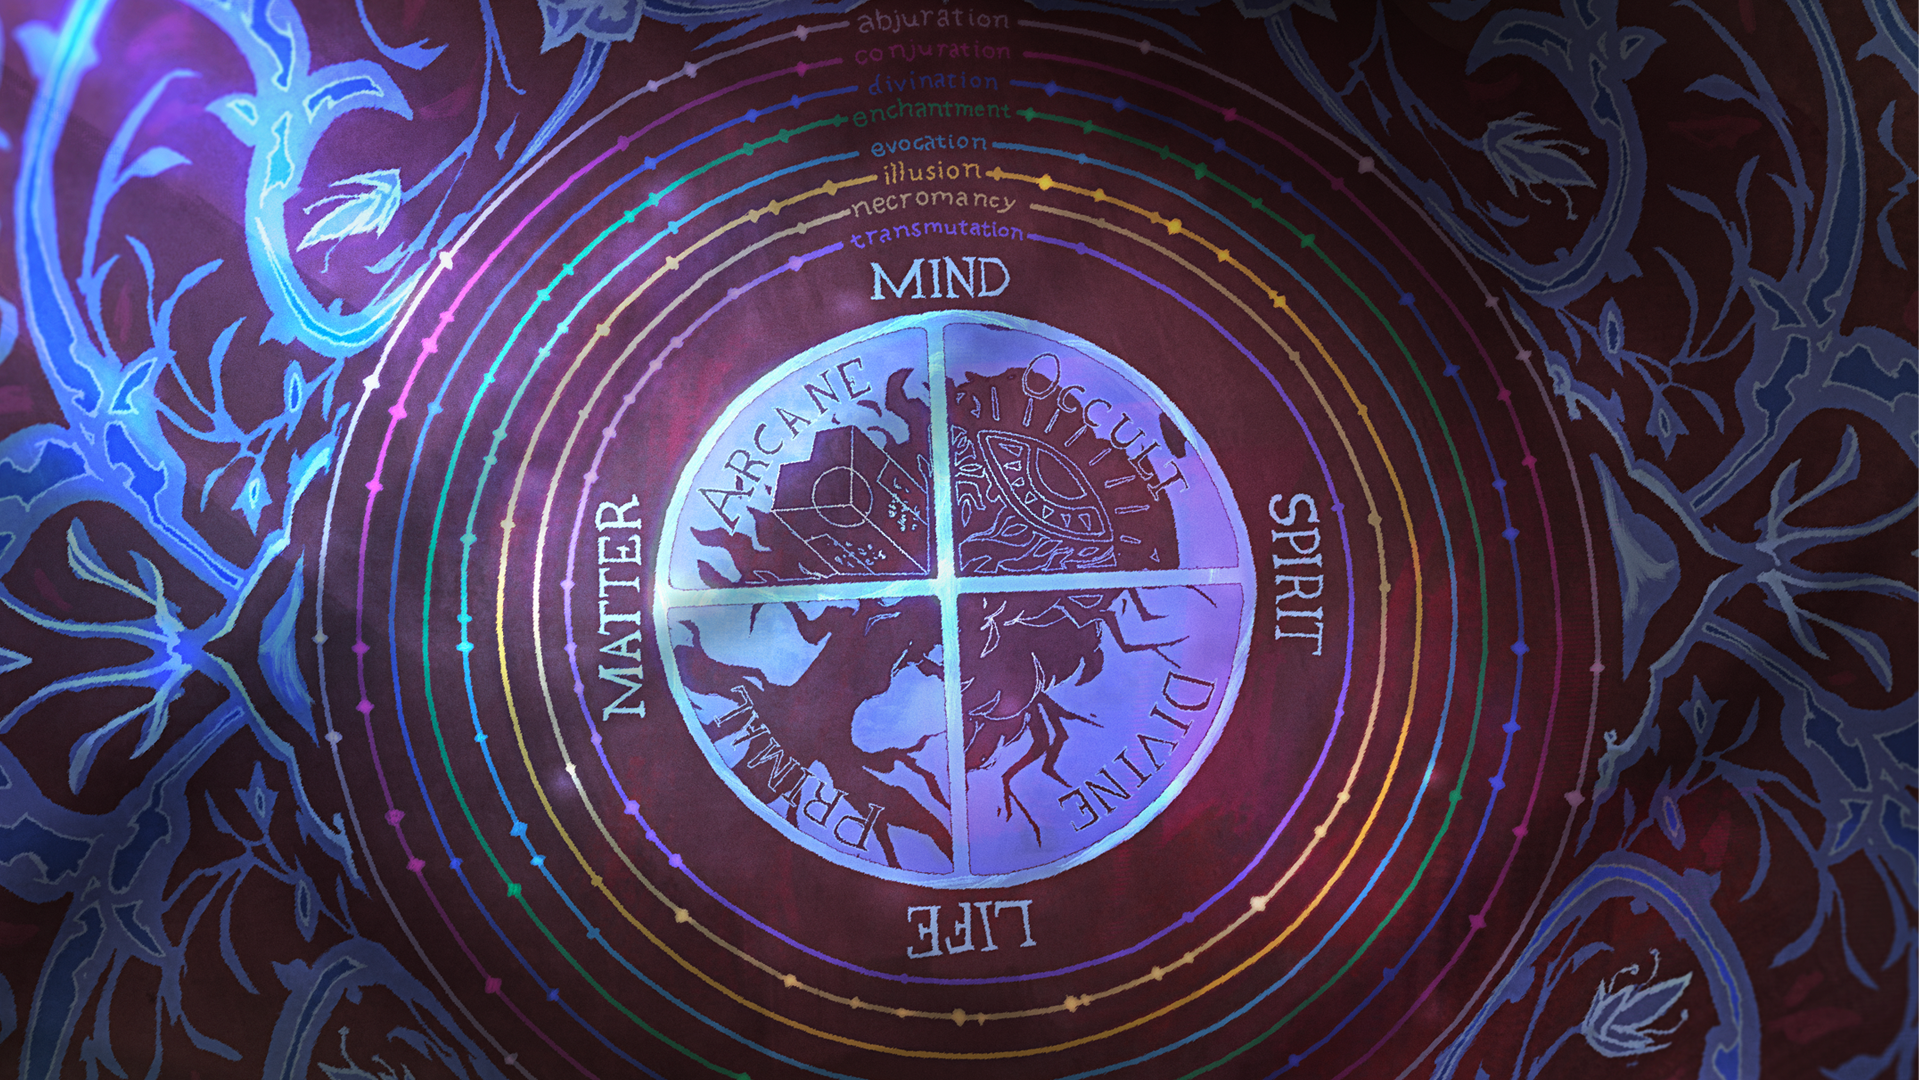 Pathfinder Secrets of Magic: wheel of magic with the points pointing towards the words 'mind' 'spirit' 'life' and 'matter'